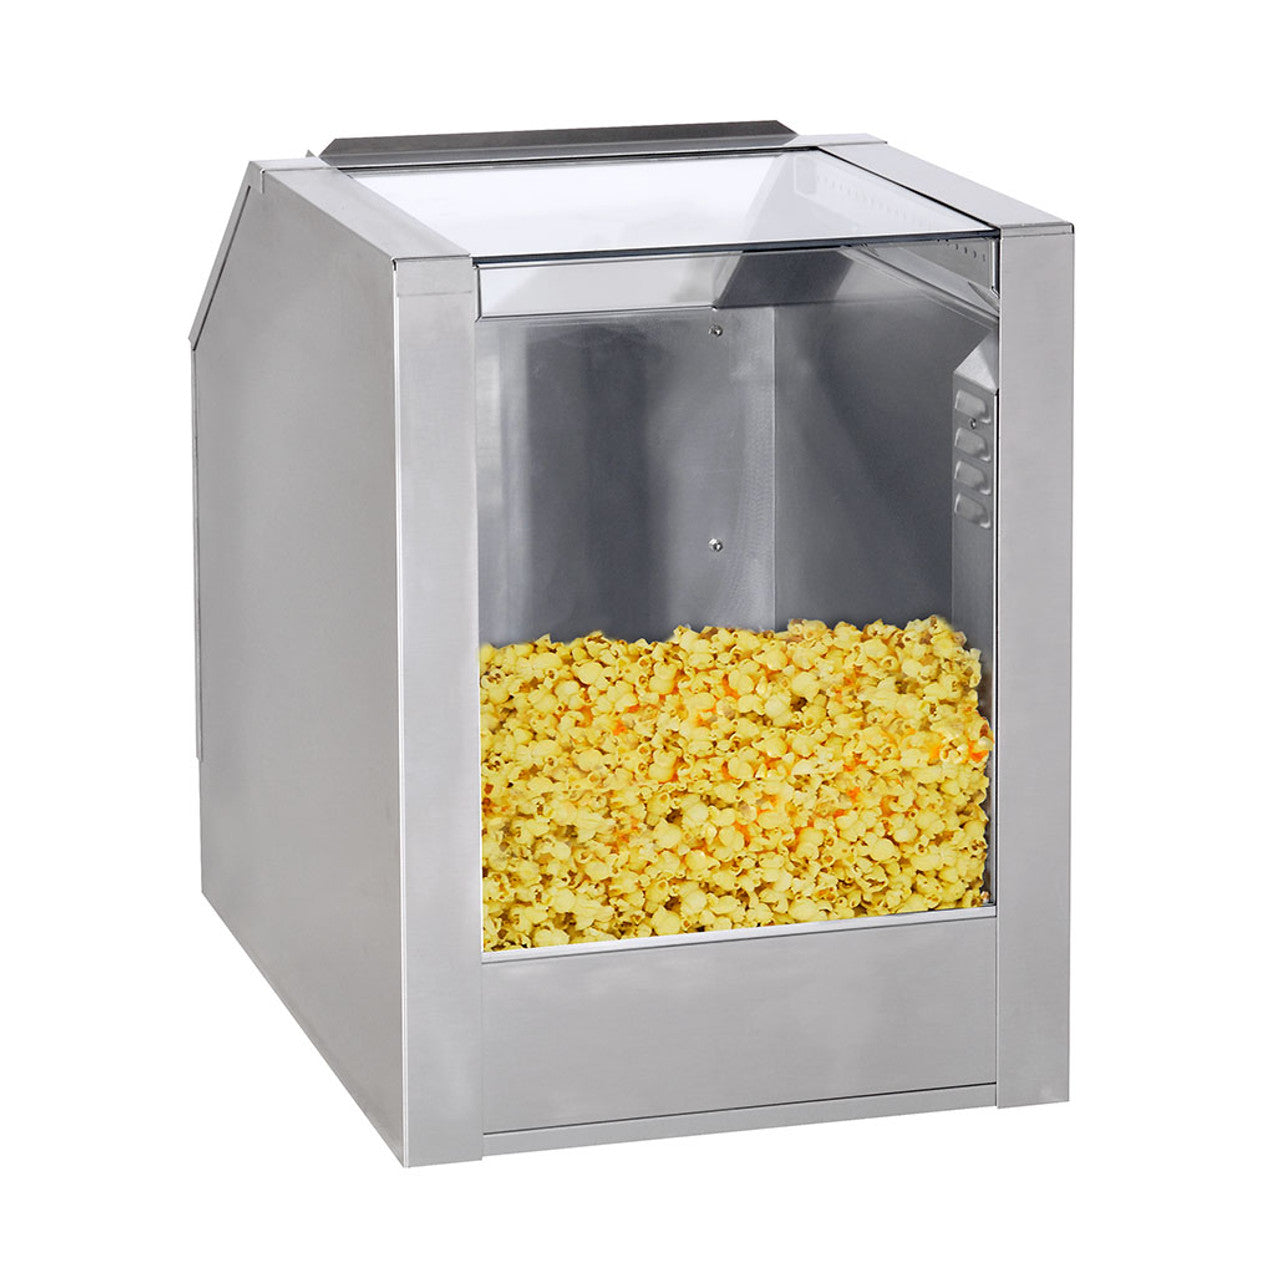 Cretors 20 Counter Showcase Cornditioner Cabinet for storing popcorn and keeping it warm